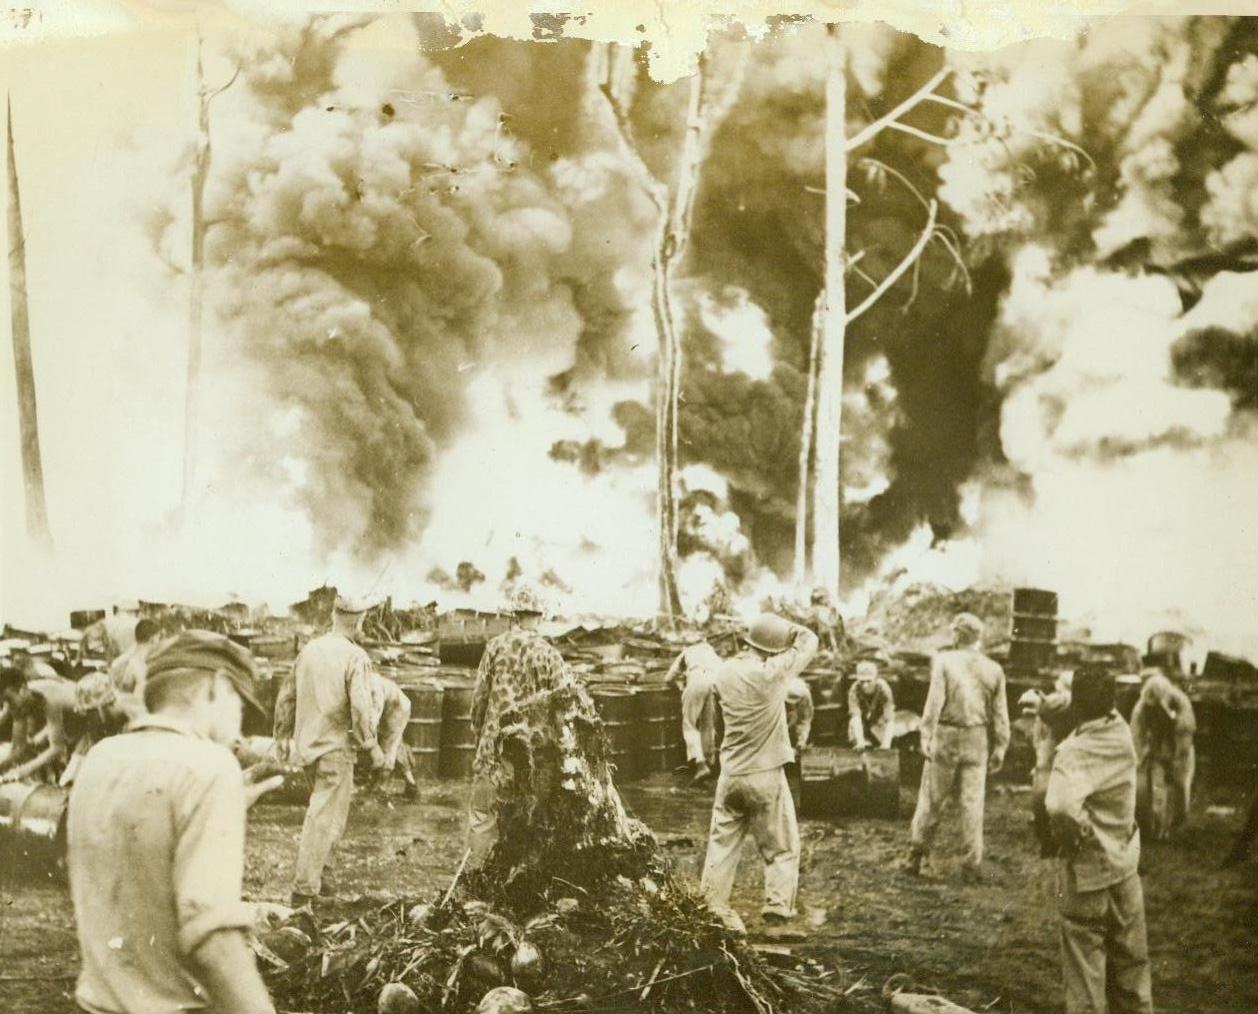 Leathernecks save fuel from Jap bomb fire, 1/11/1944. PURUATA ISLAND – United States Marines roll out unexploded drums of fuel from within 30 feet of hungry pillars of fire, set off by a Jap bomb hit on Puruata Island. Thousands of drums, wet down by hose lines, were saved by the leathernecks fighting in the Bougainville Area. Two heat prostration cases were the only casualties in the “battle” with a flaming enemy. CREDIT (Official U.S. Marine Corps photo – ACME) 1/11/44;